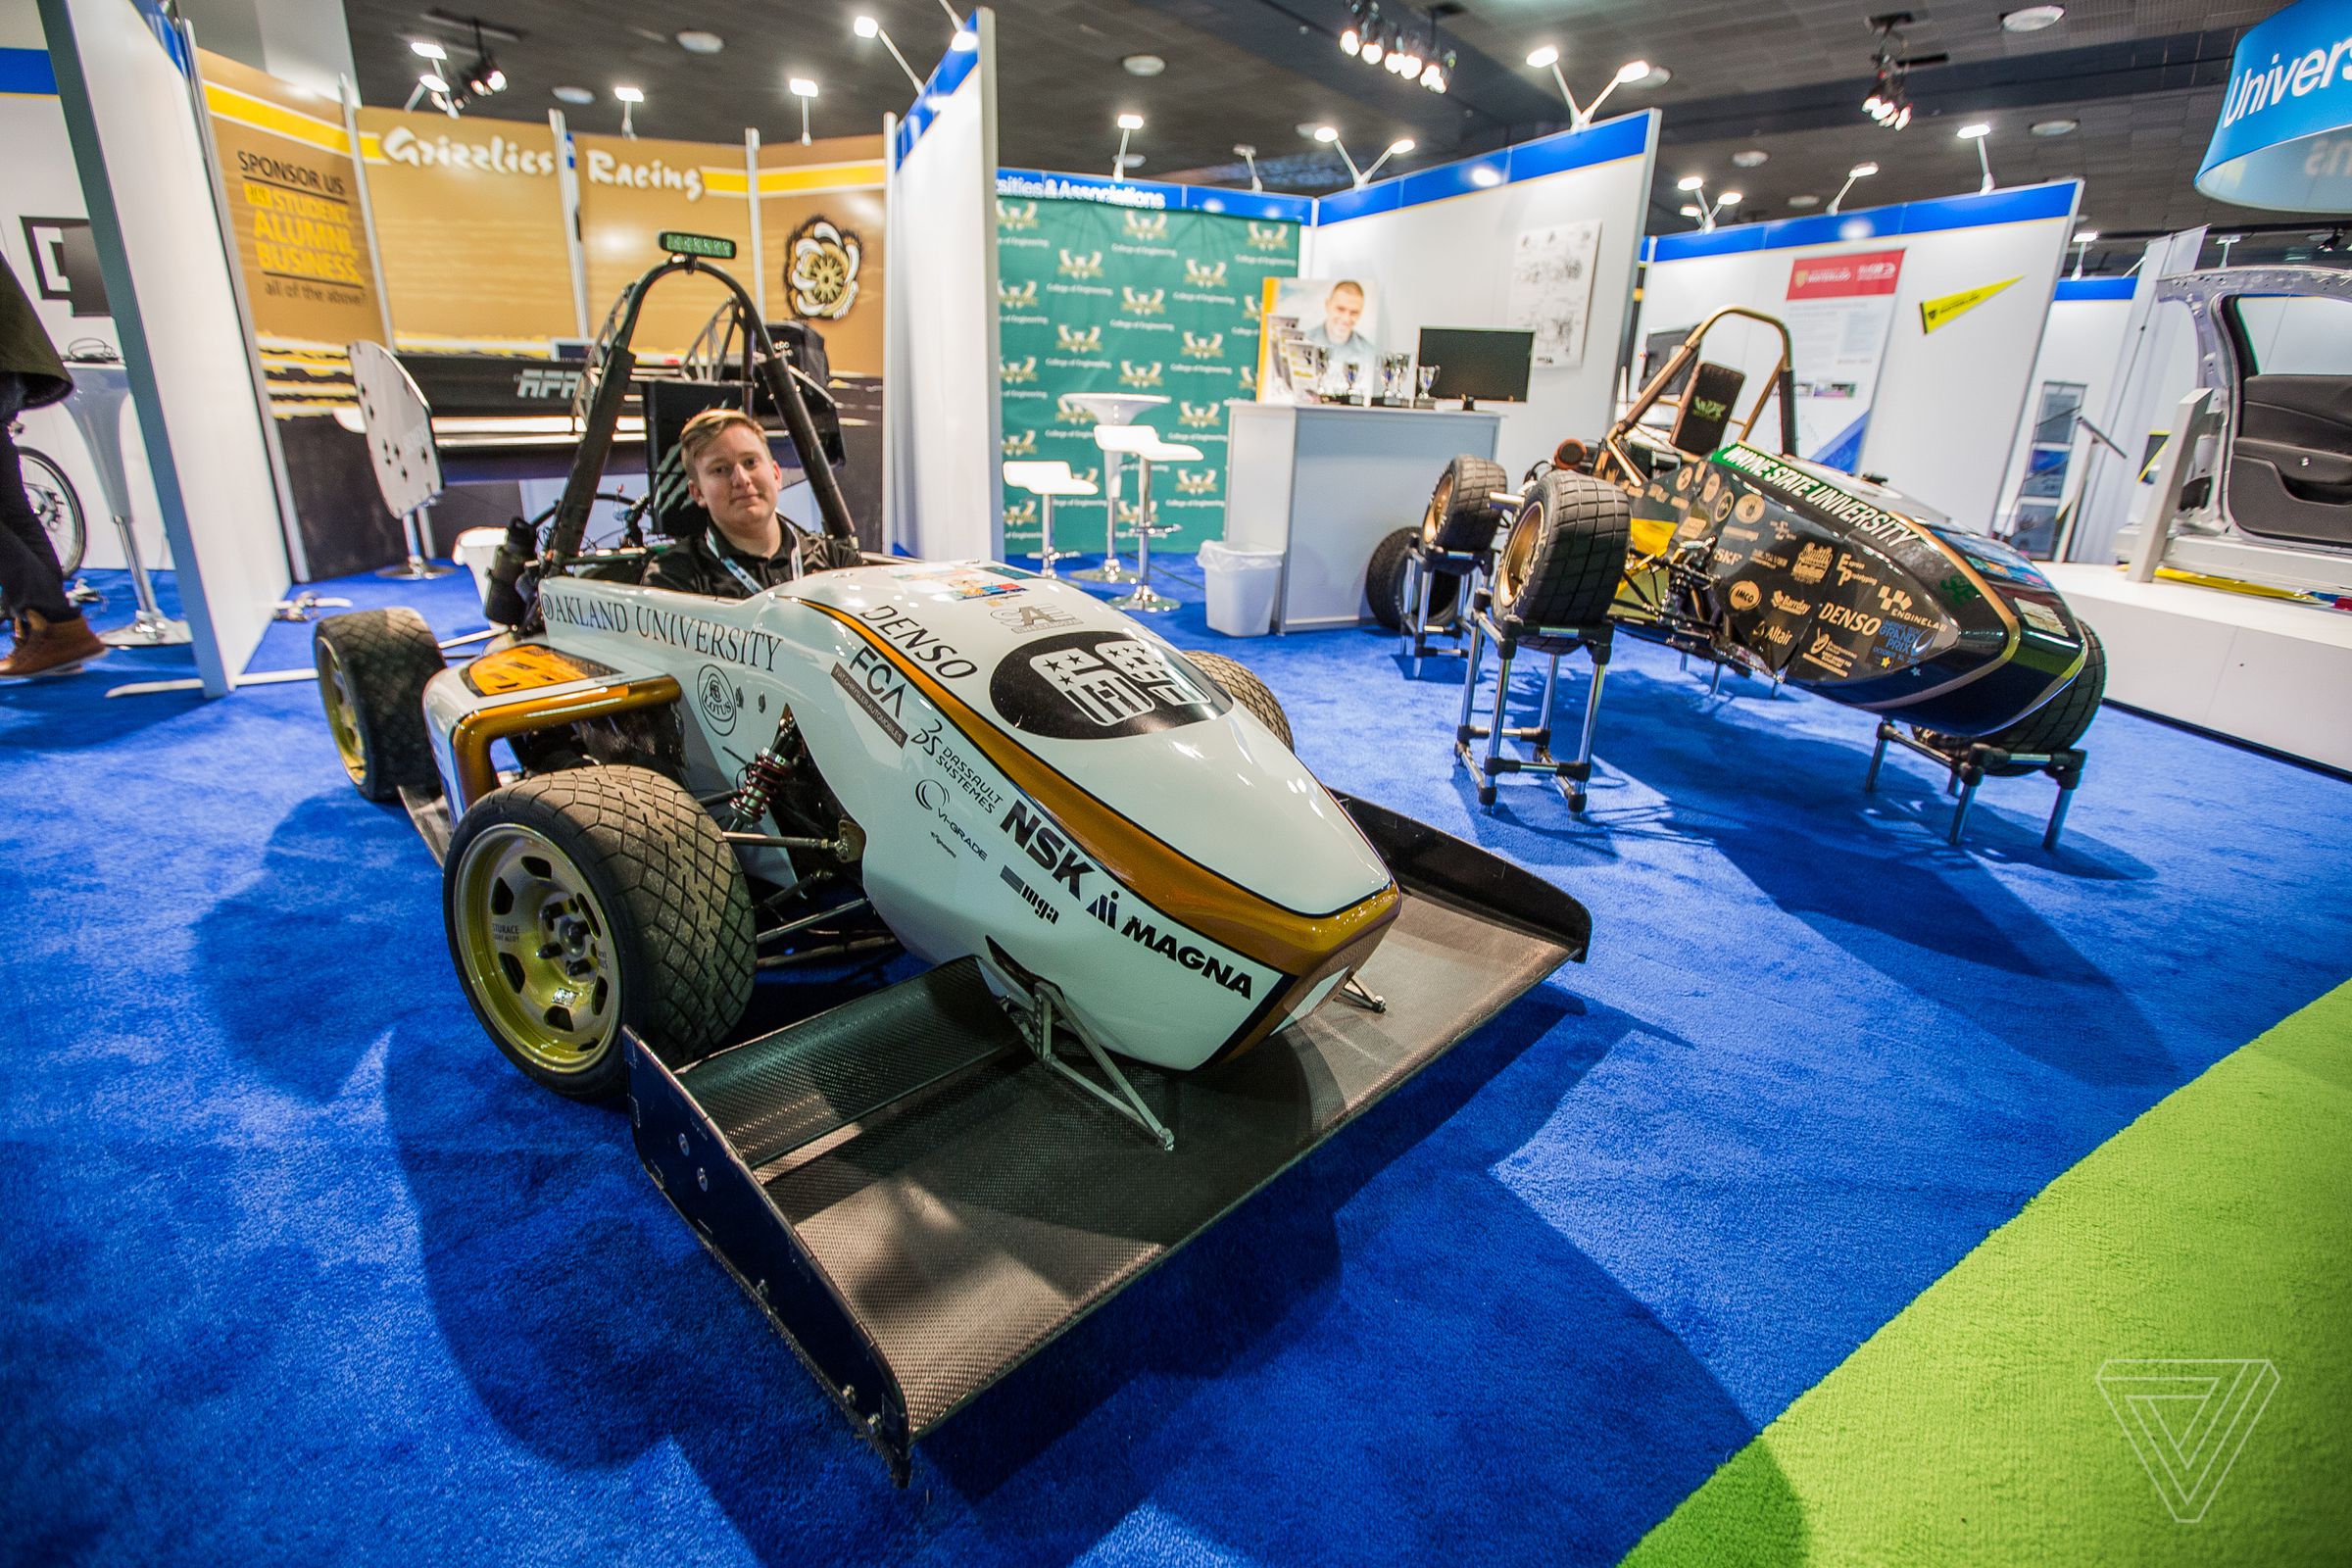 Paul Hollinsky of the Oakland University Formula SAE team sits in his club’s racecar. Automotive projects from a number of different colleges and universities are on display in the Automobili-D section downstairs at the show.